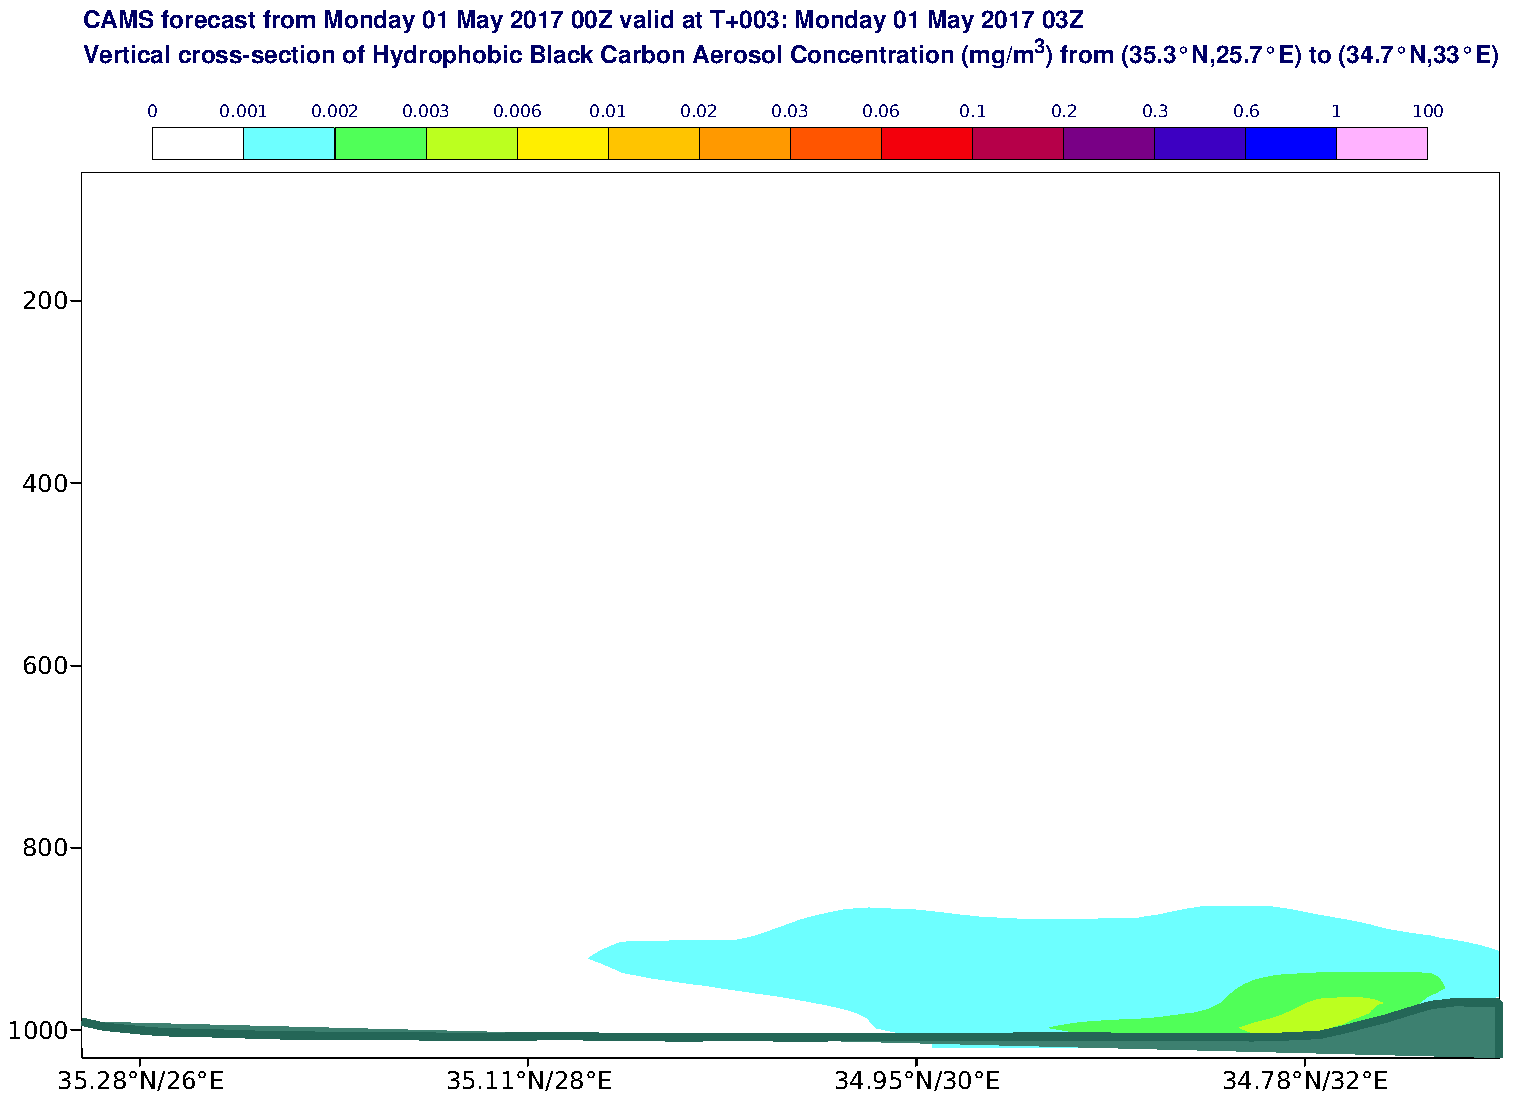 Vertical cross-section of Hydrophobic Black Carbon Aerosol Concentration (mg/m3) valid at T3 - 2017-05-01 03:00